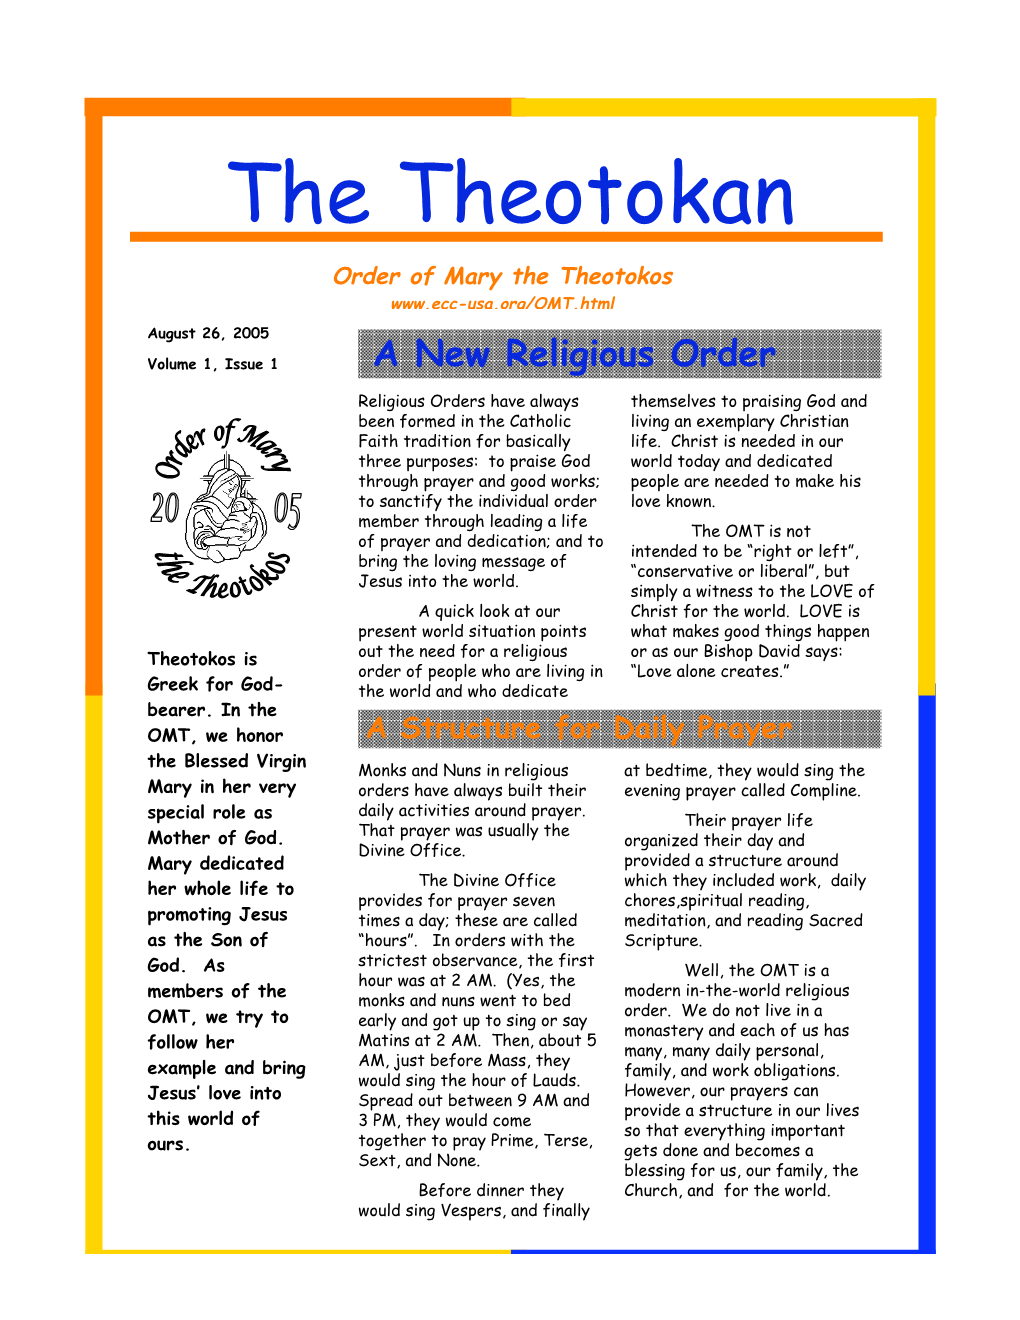 The Theotokan Order of Mary the Theotokos August 26, 2005 Volume 1, Issue 1 a New Religious Order